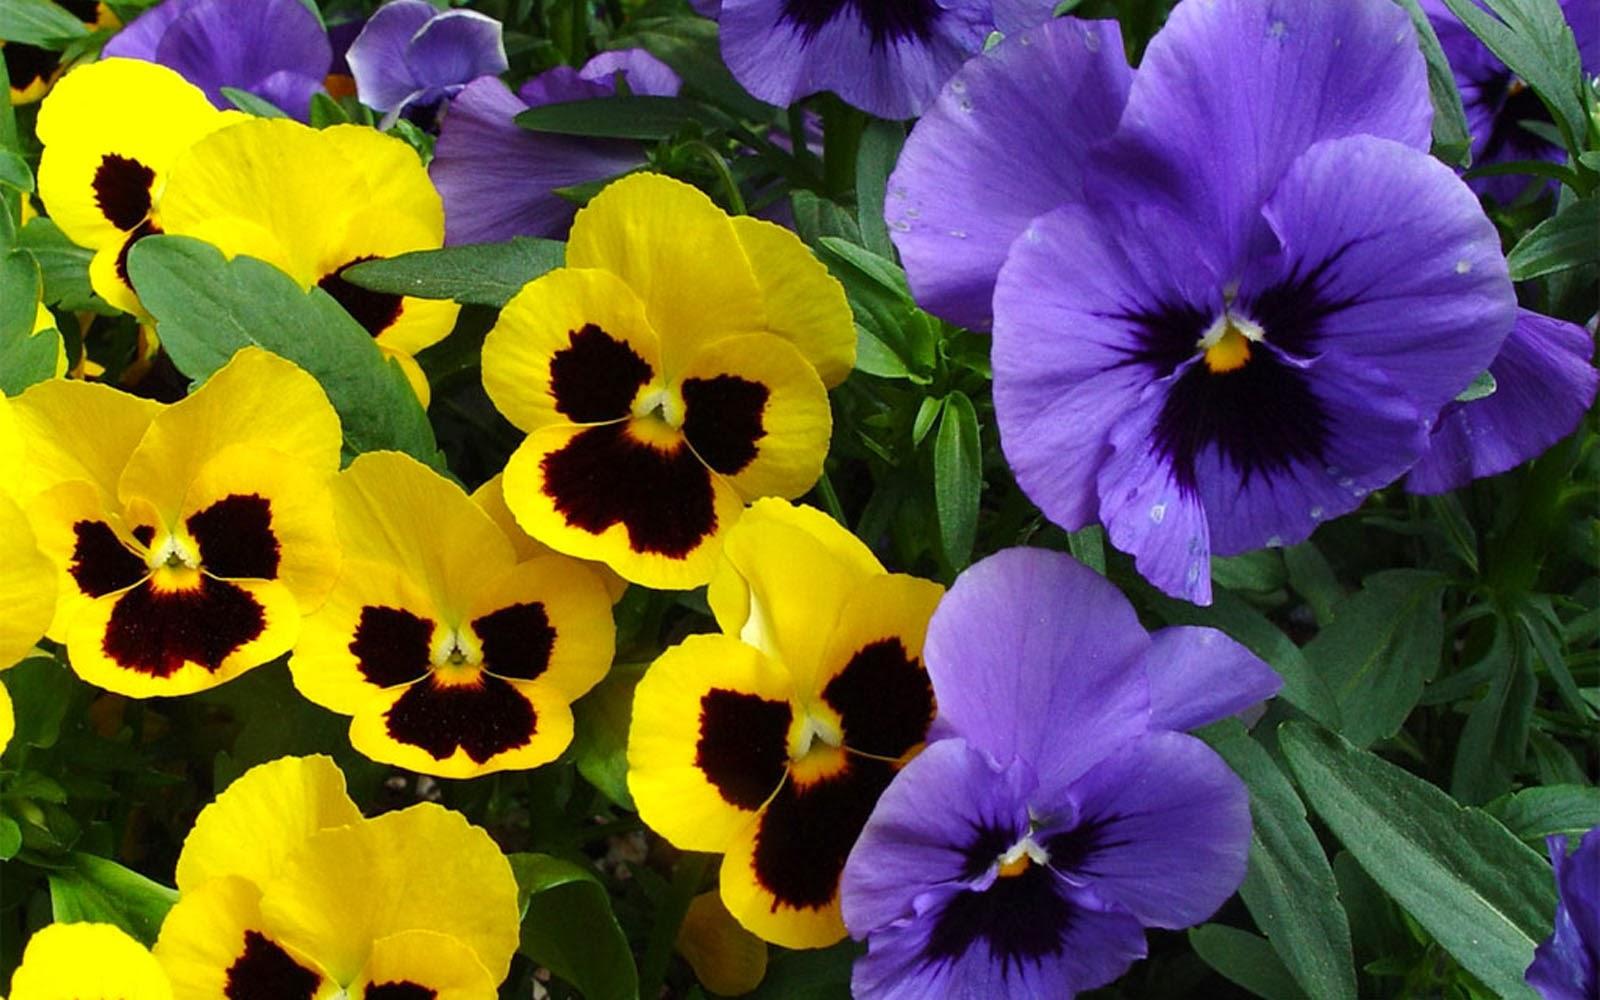 Pansy Flower Image Free. Top Collection of different types